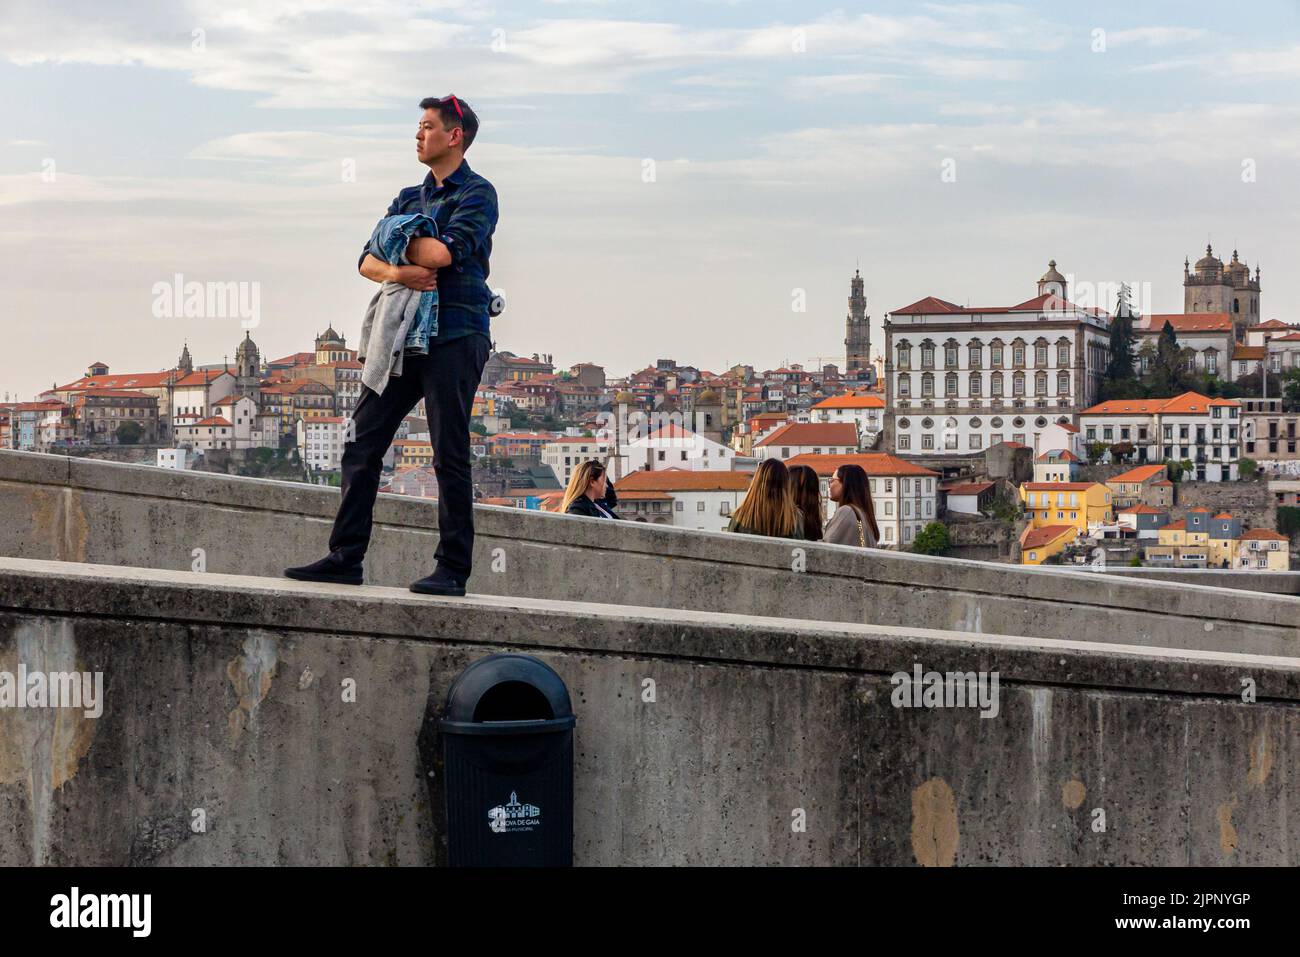 Tourists admiring the view of the historic city centre in Porto a major city in northern Portugal. Stock Photo